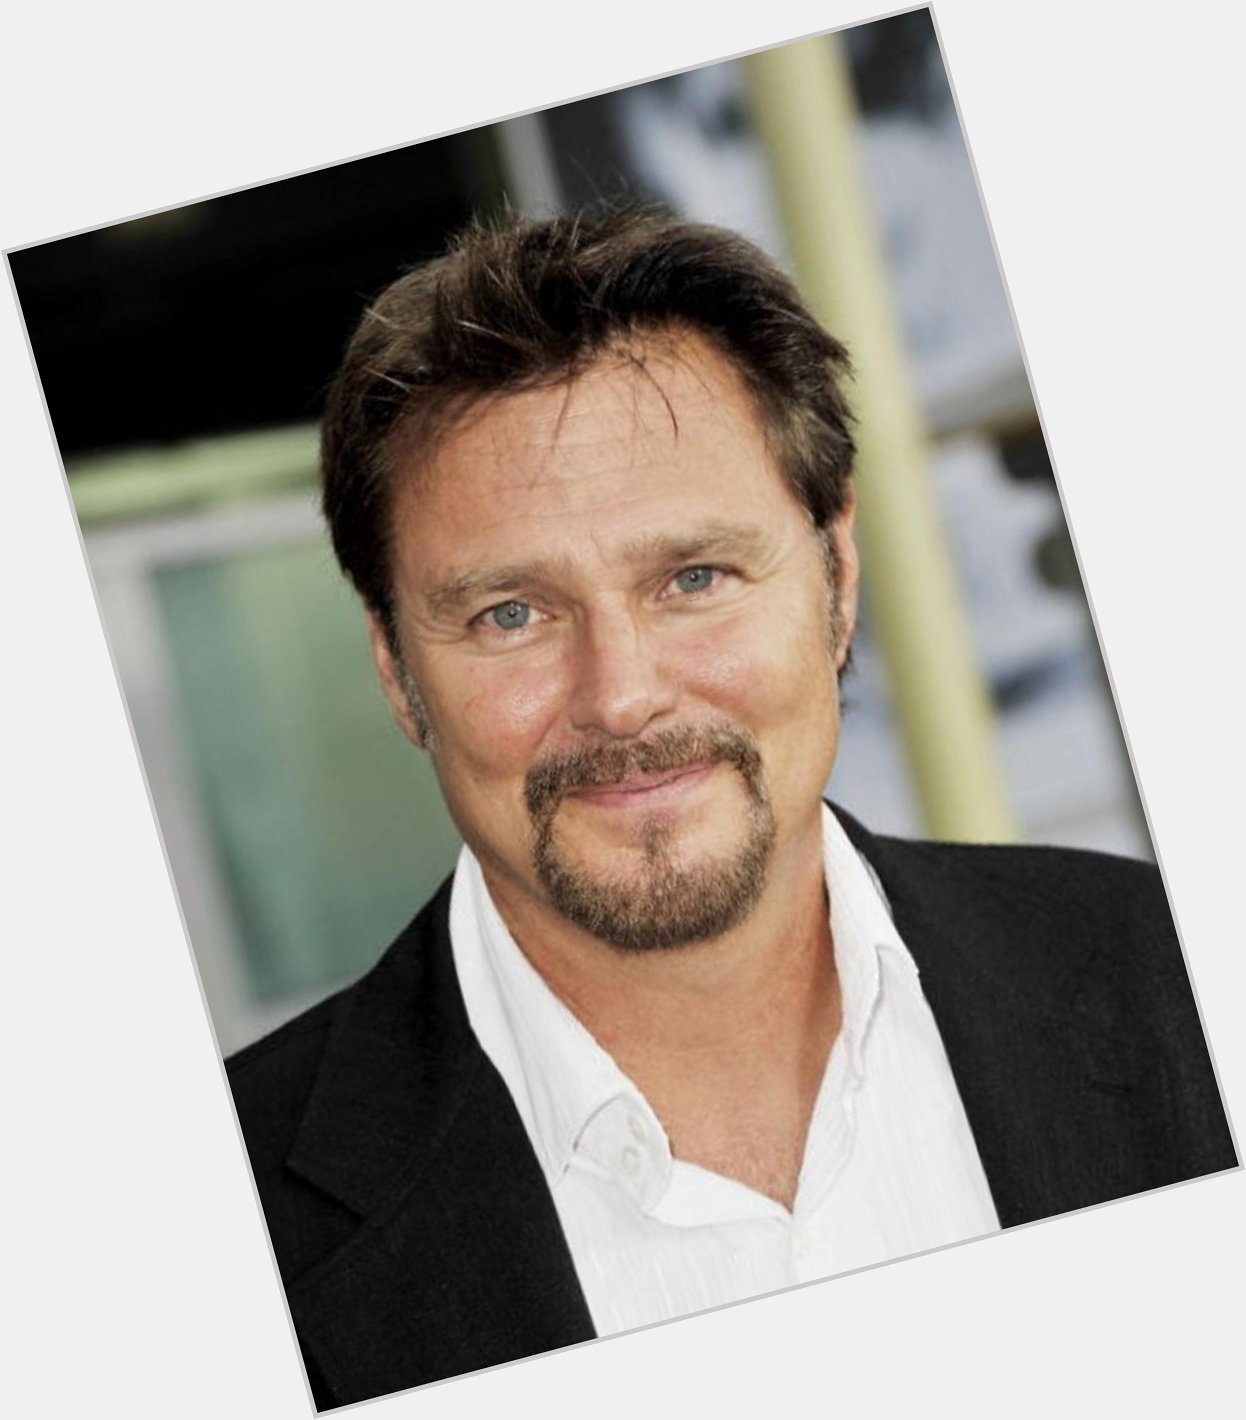 Happy Birthday to a actor who\s fun to watch and whom I watched on BJ and the Bear growing up. Greg Evigan. 